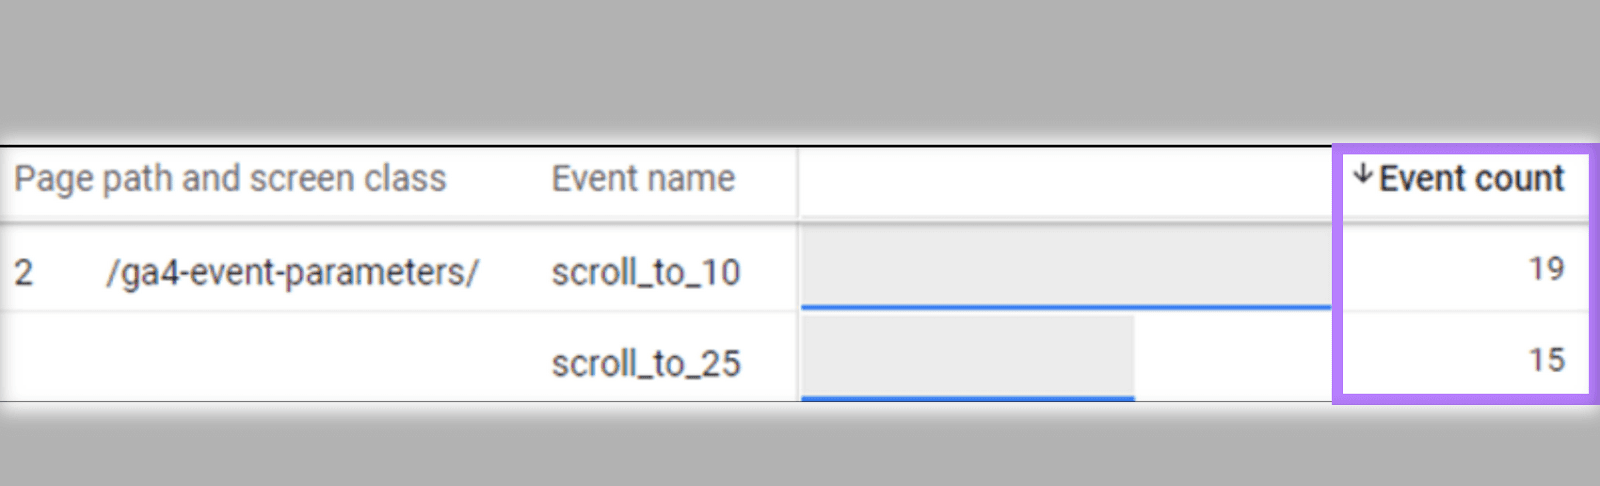 "Even count" filed highlighted for the two scroll events in a table